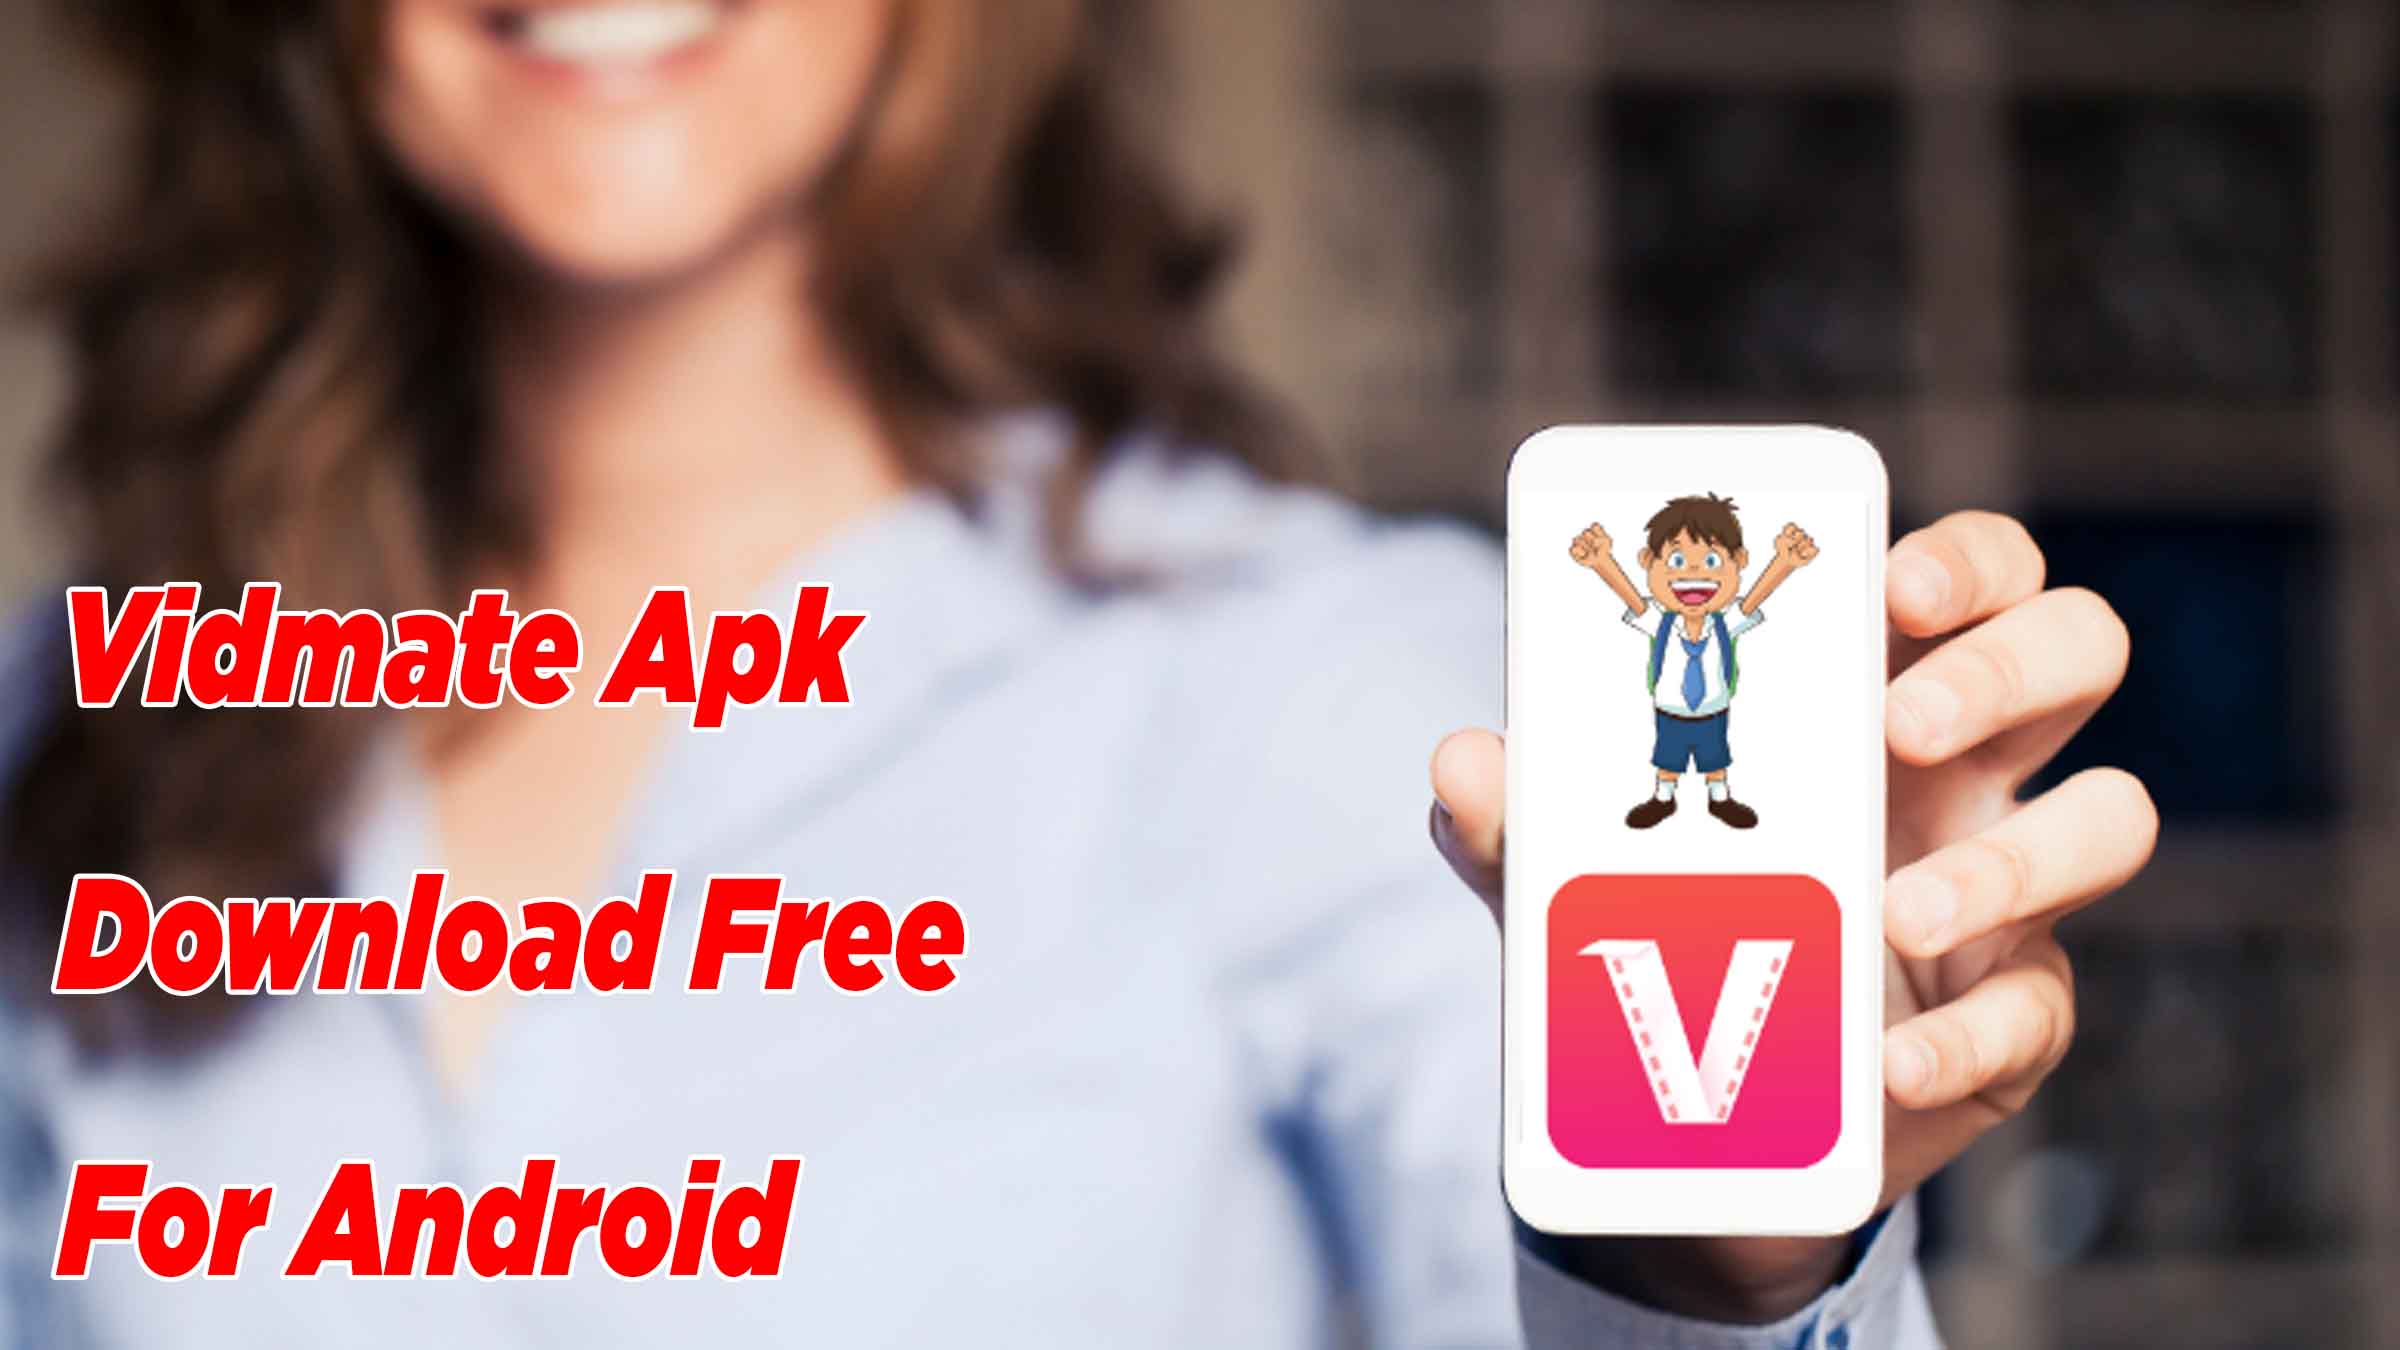 Vidmate Apk Download Free For Android